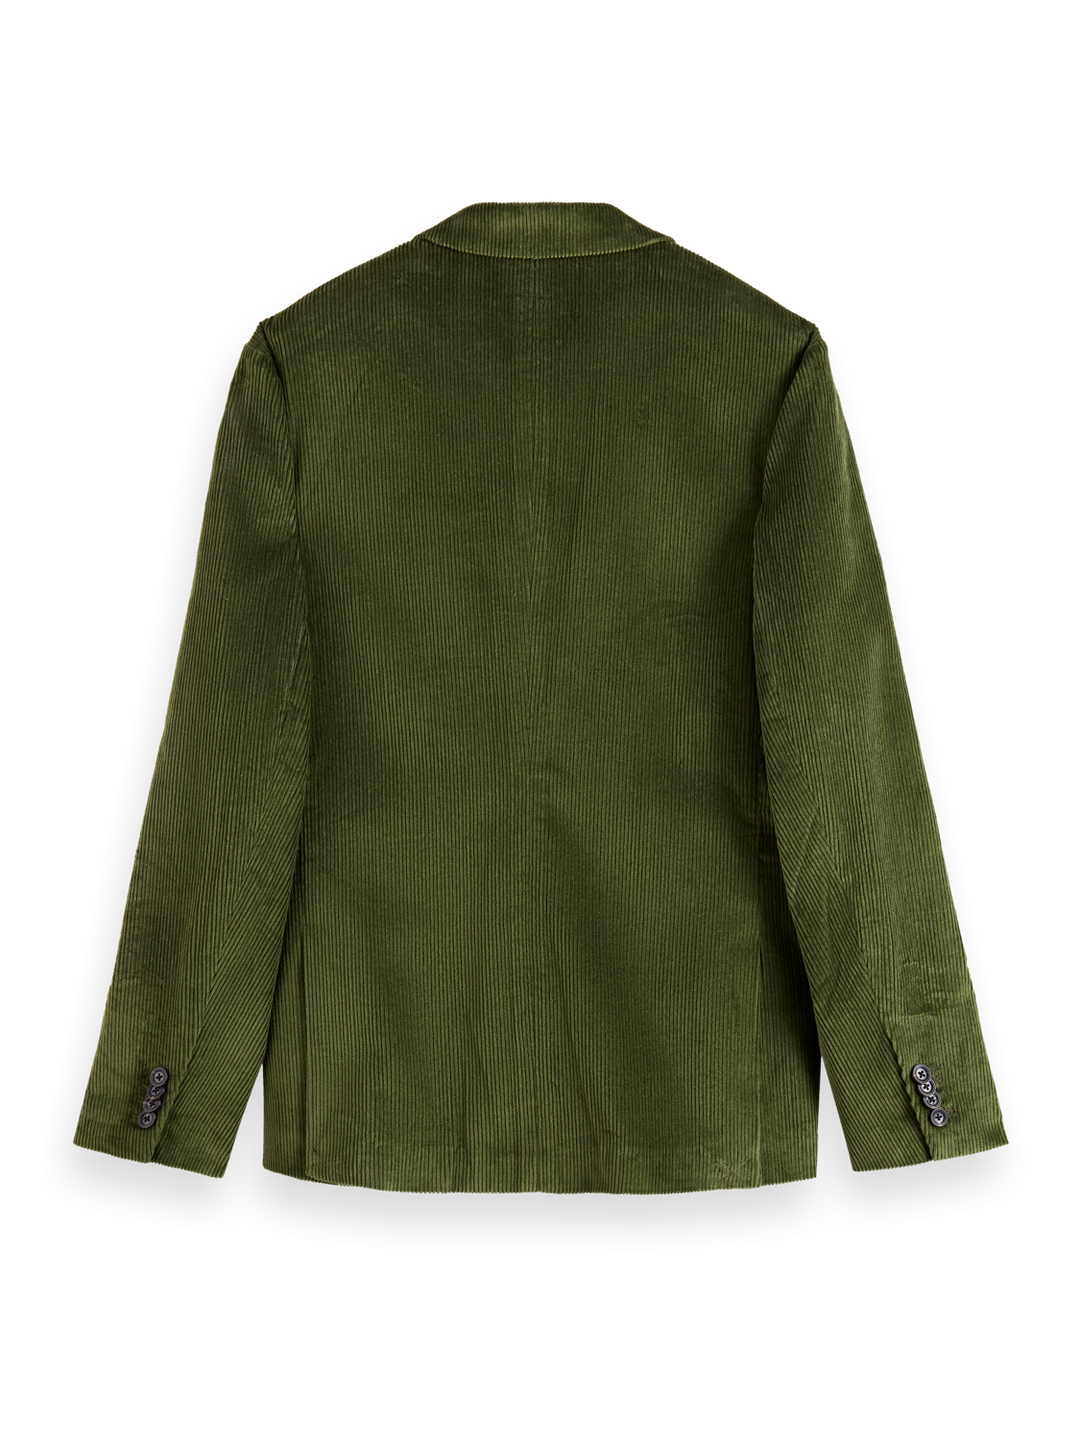 Single Breasted Corduroy Blazer in Field Green | Buster McGee